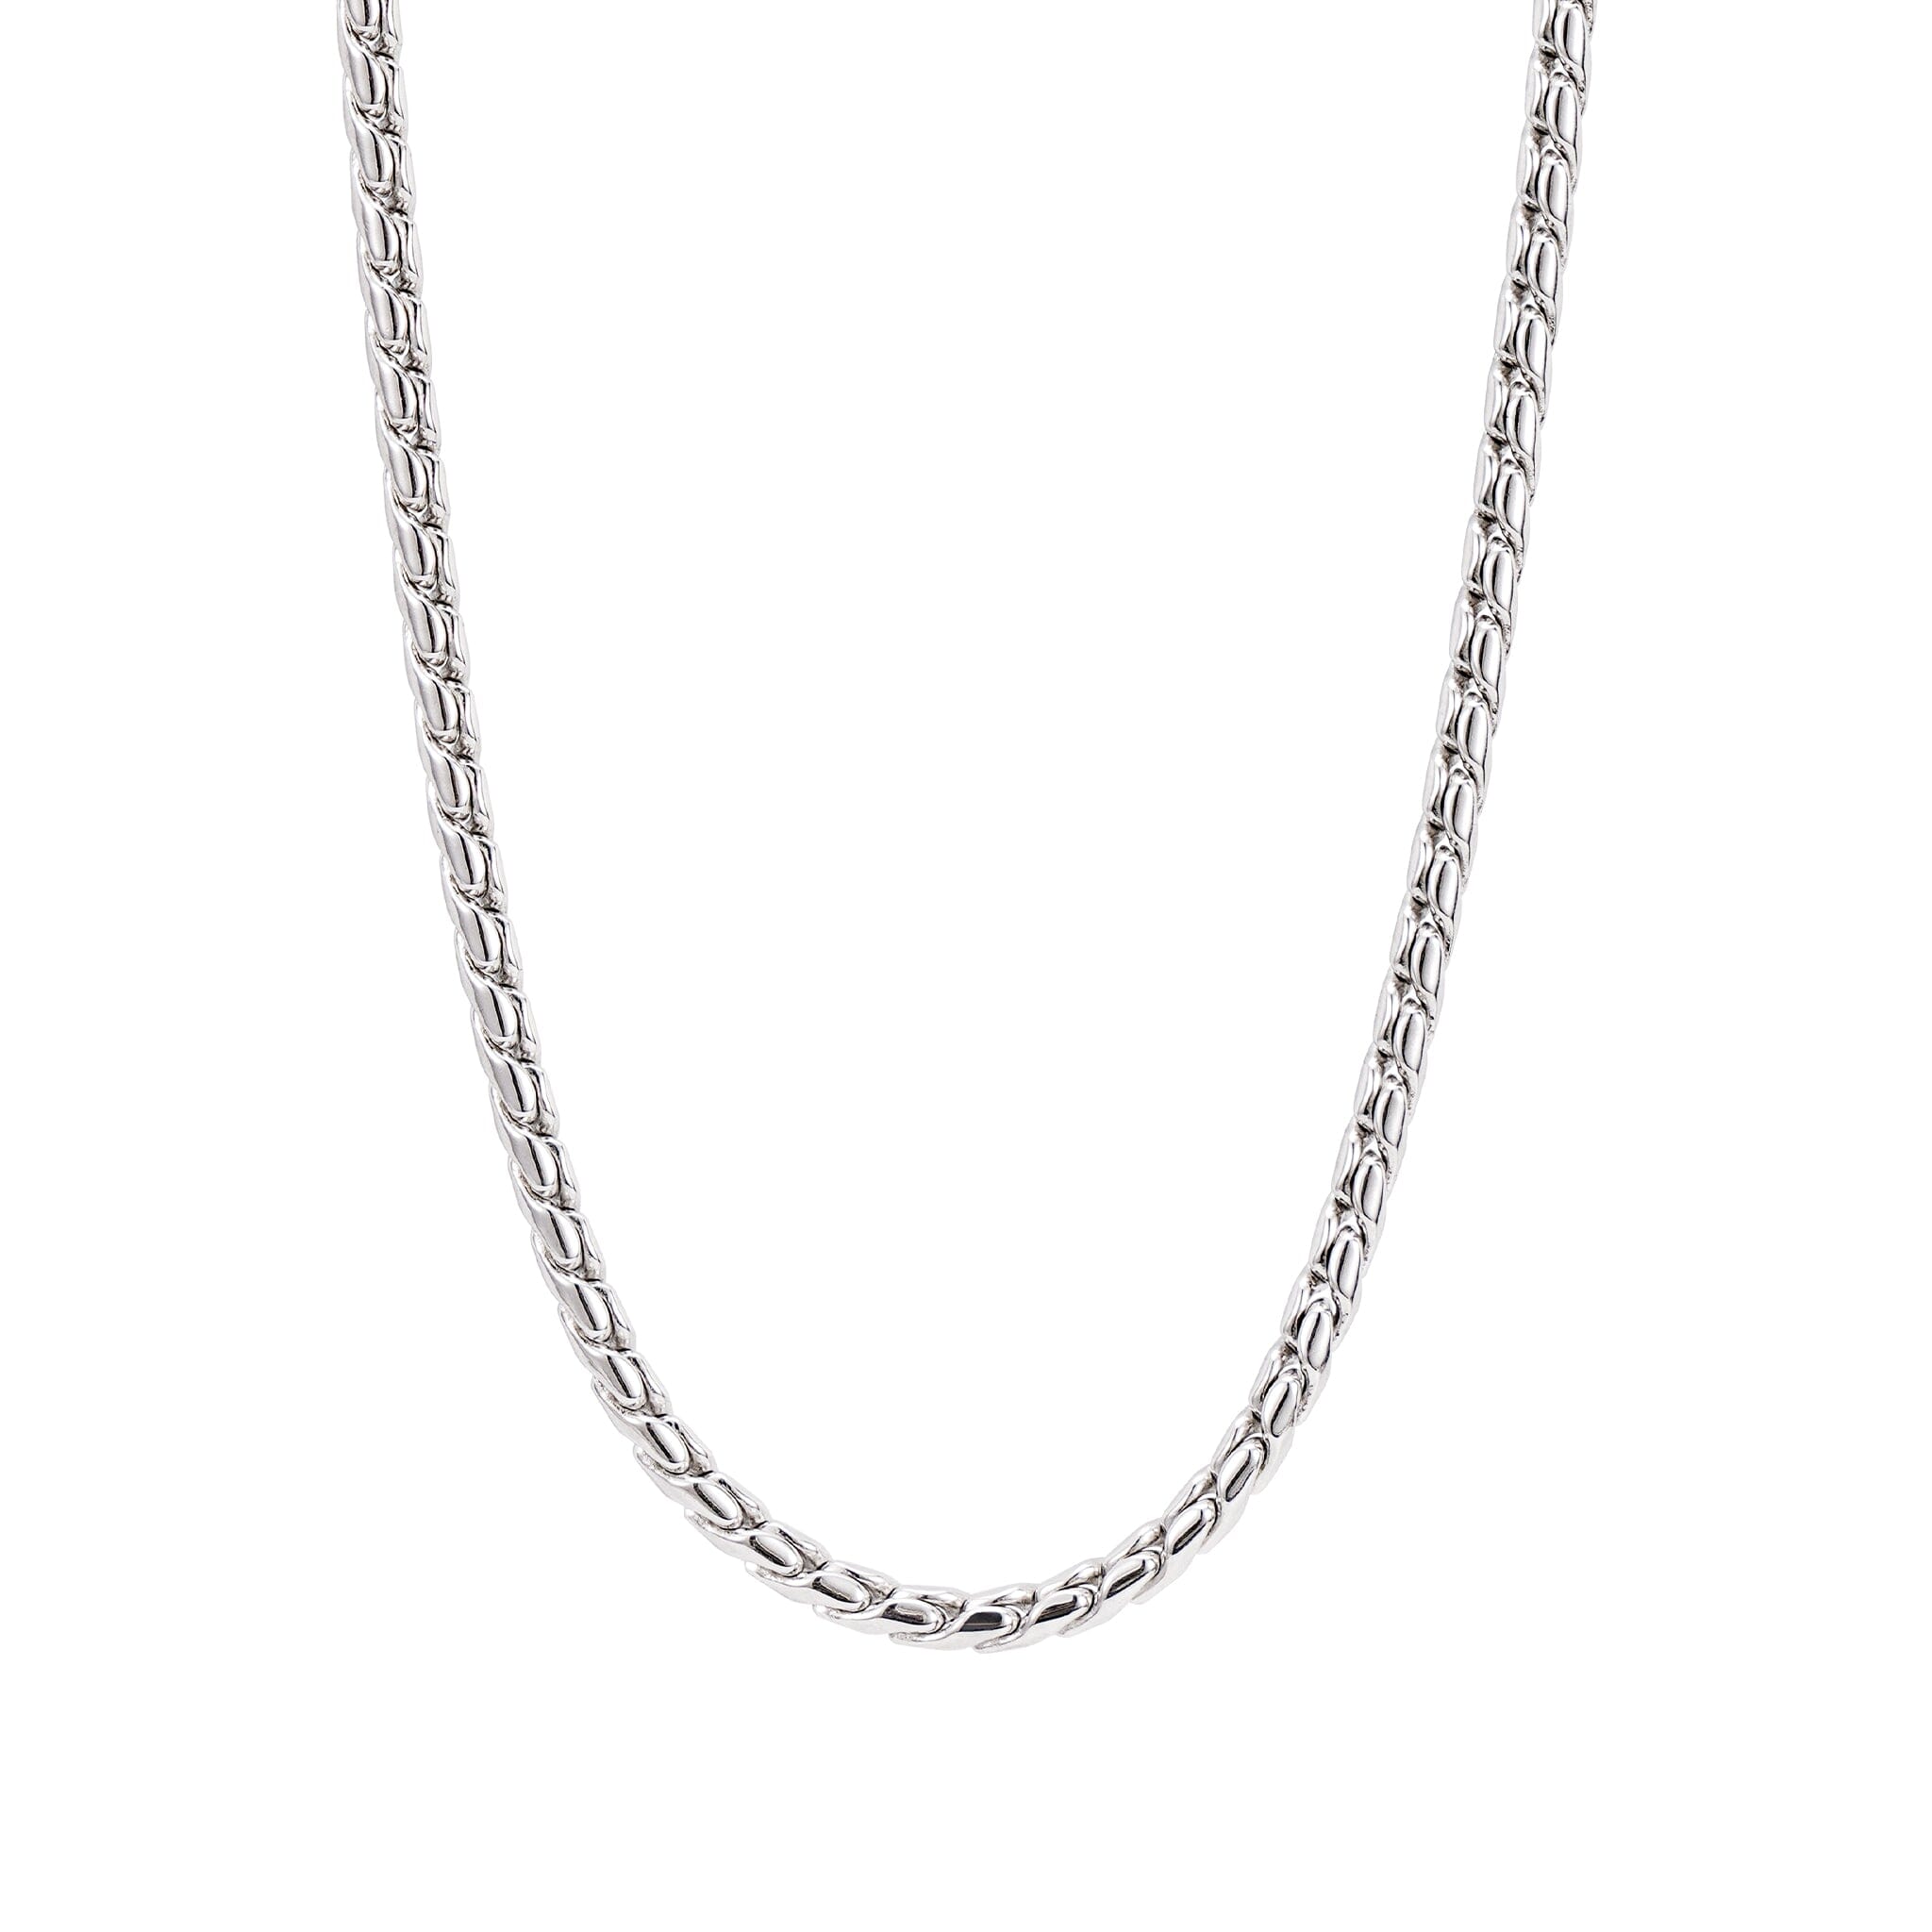 Men's Silver Chain with Feather Clasp Chains WAA FASHION GROUP 